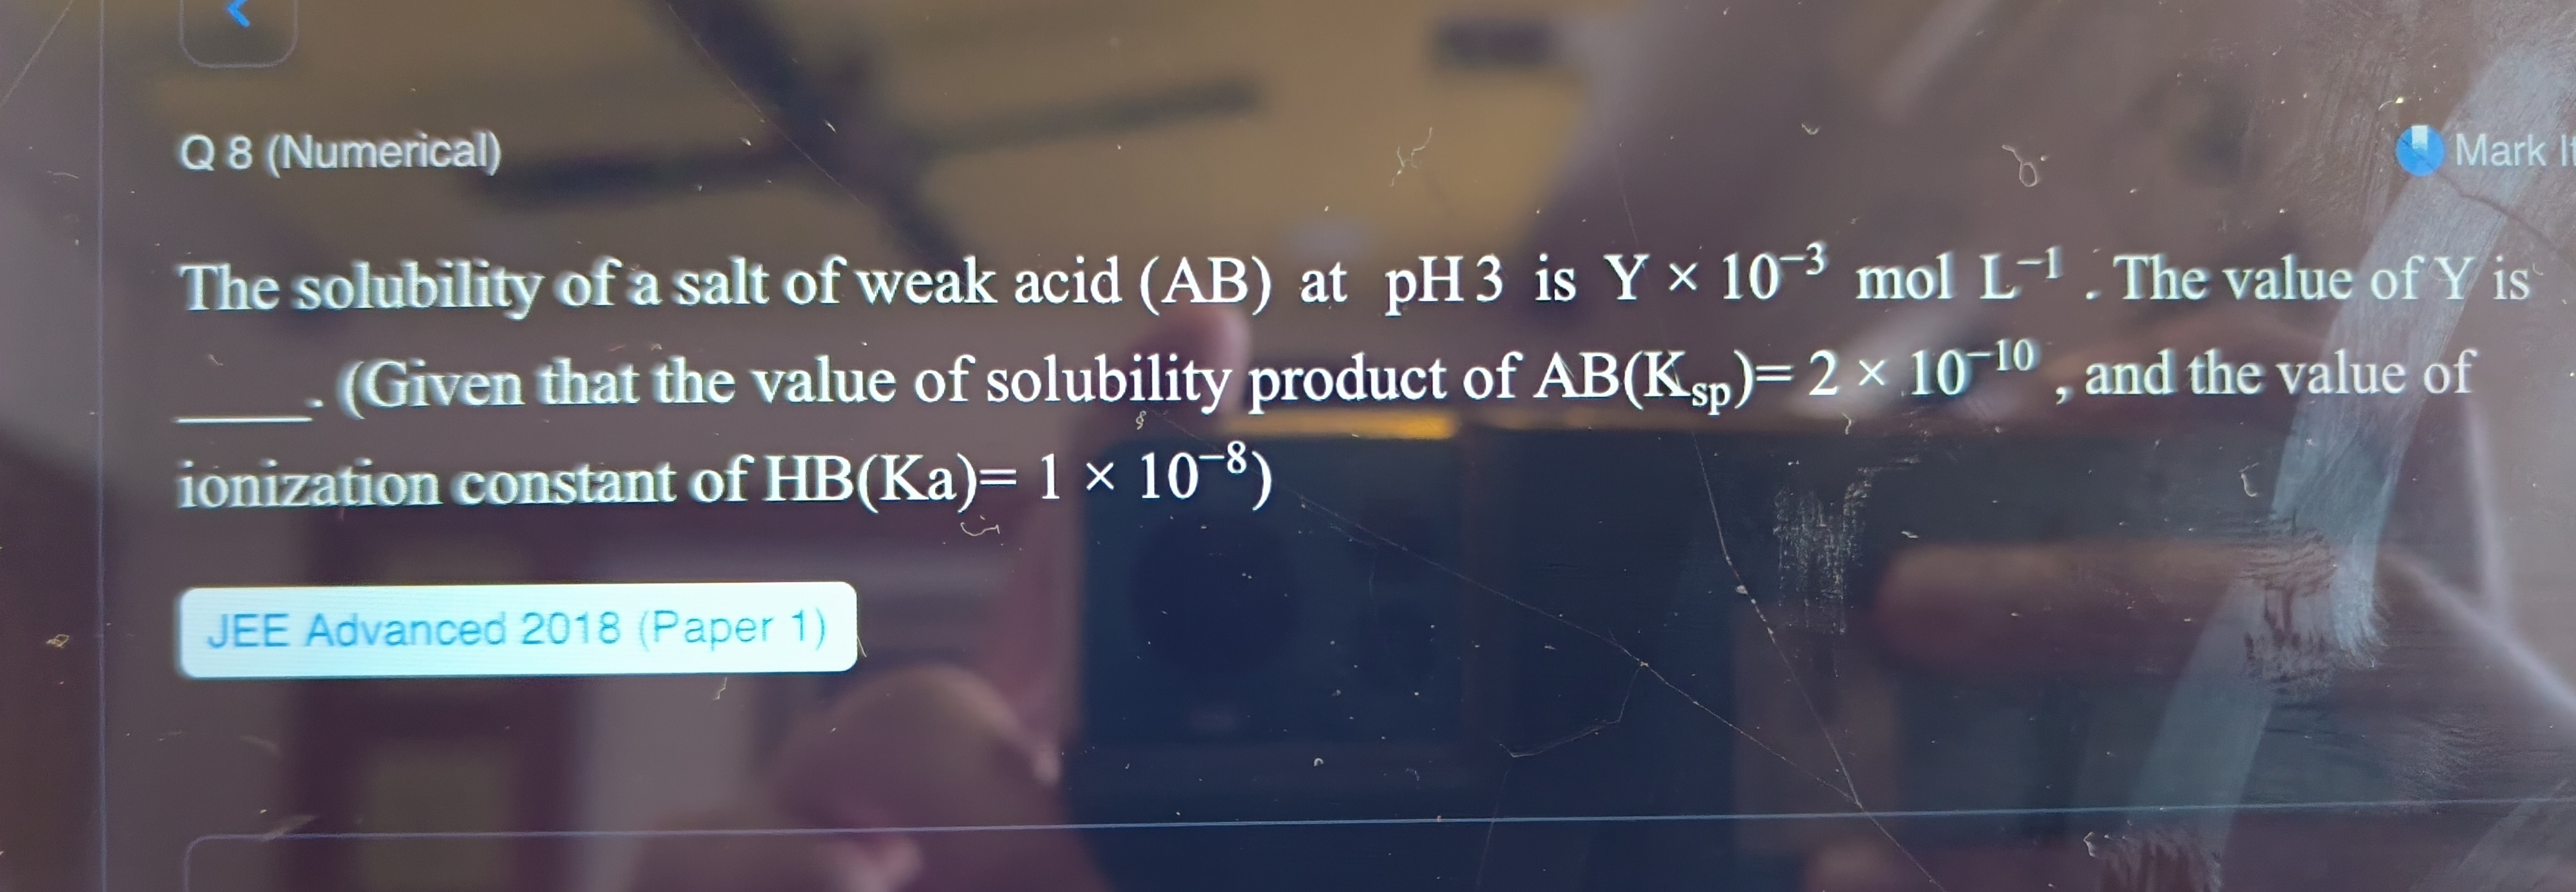 Q 8 (Numerical)
The solubility of a salt of weak acid (AB) at pH3 is Y